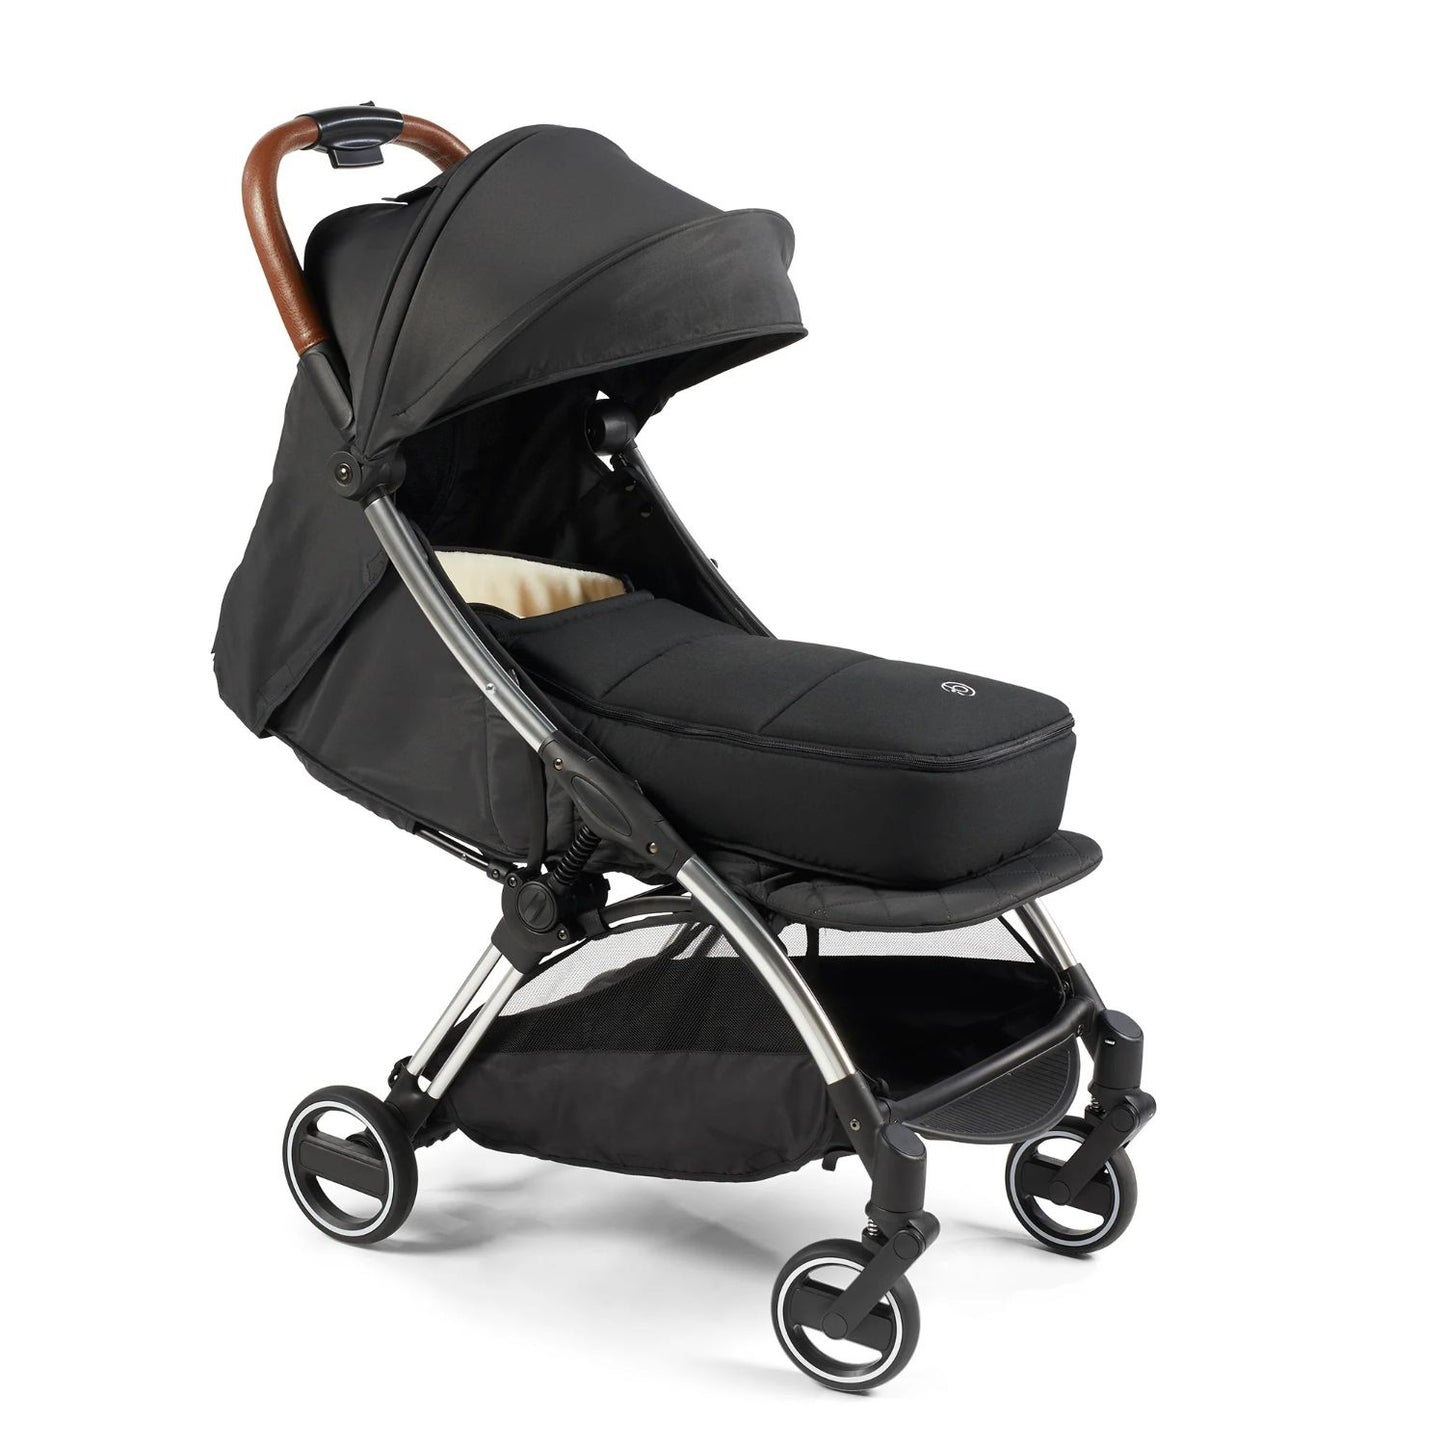 Ickle Bubba Newborn Cocoon in Black colour attached to an Ickle Bubba black pushchair